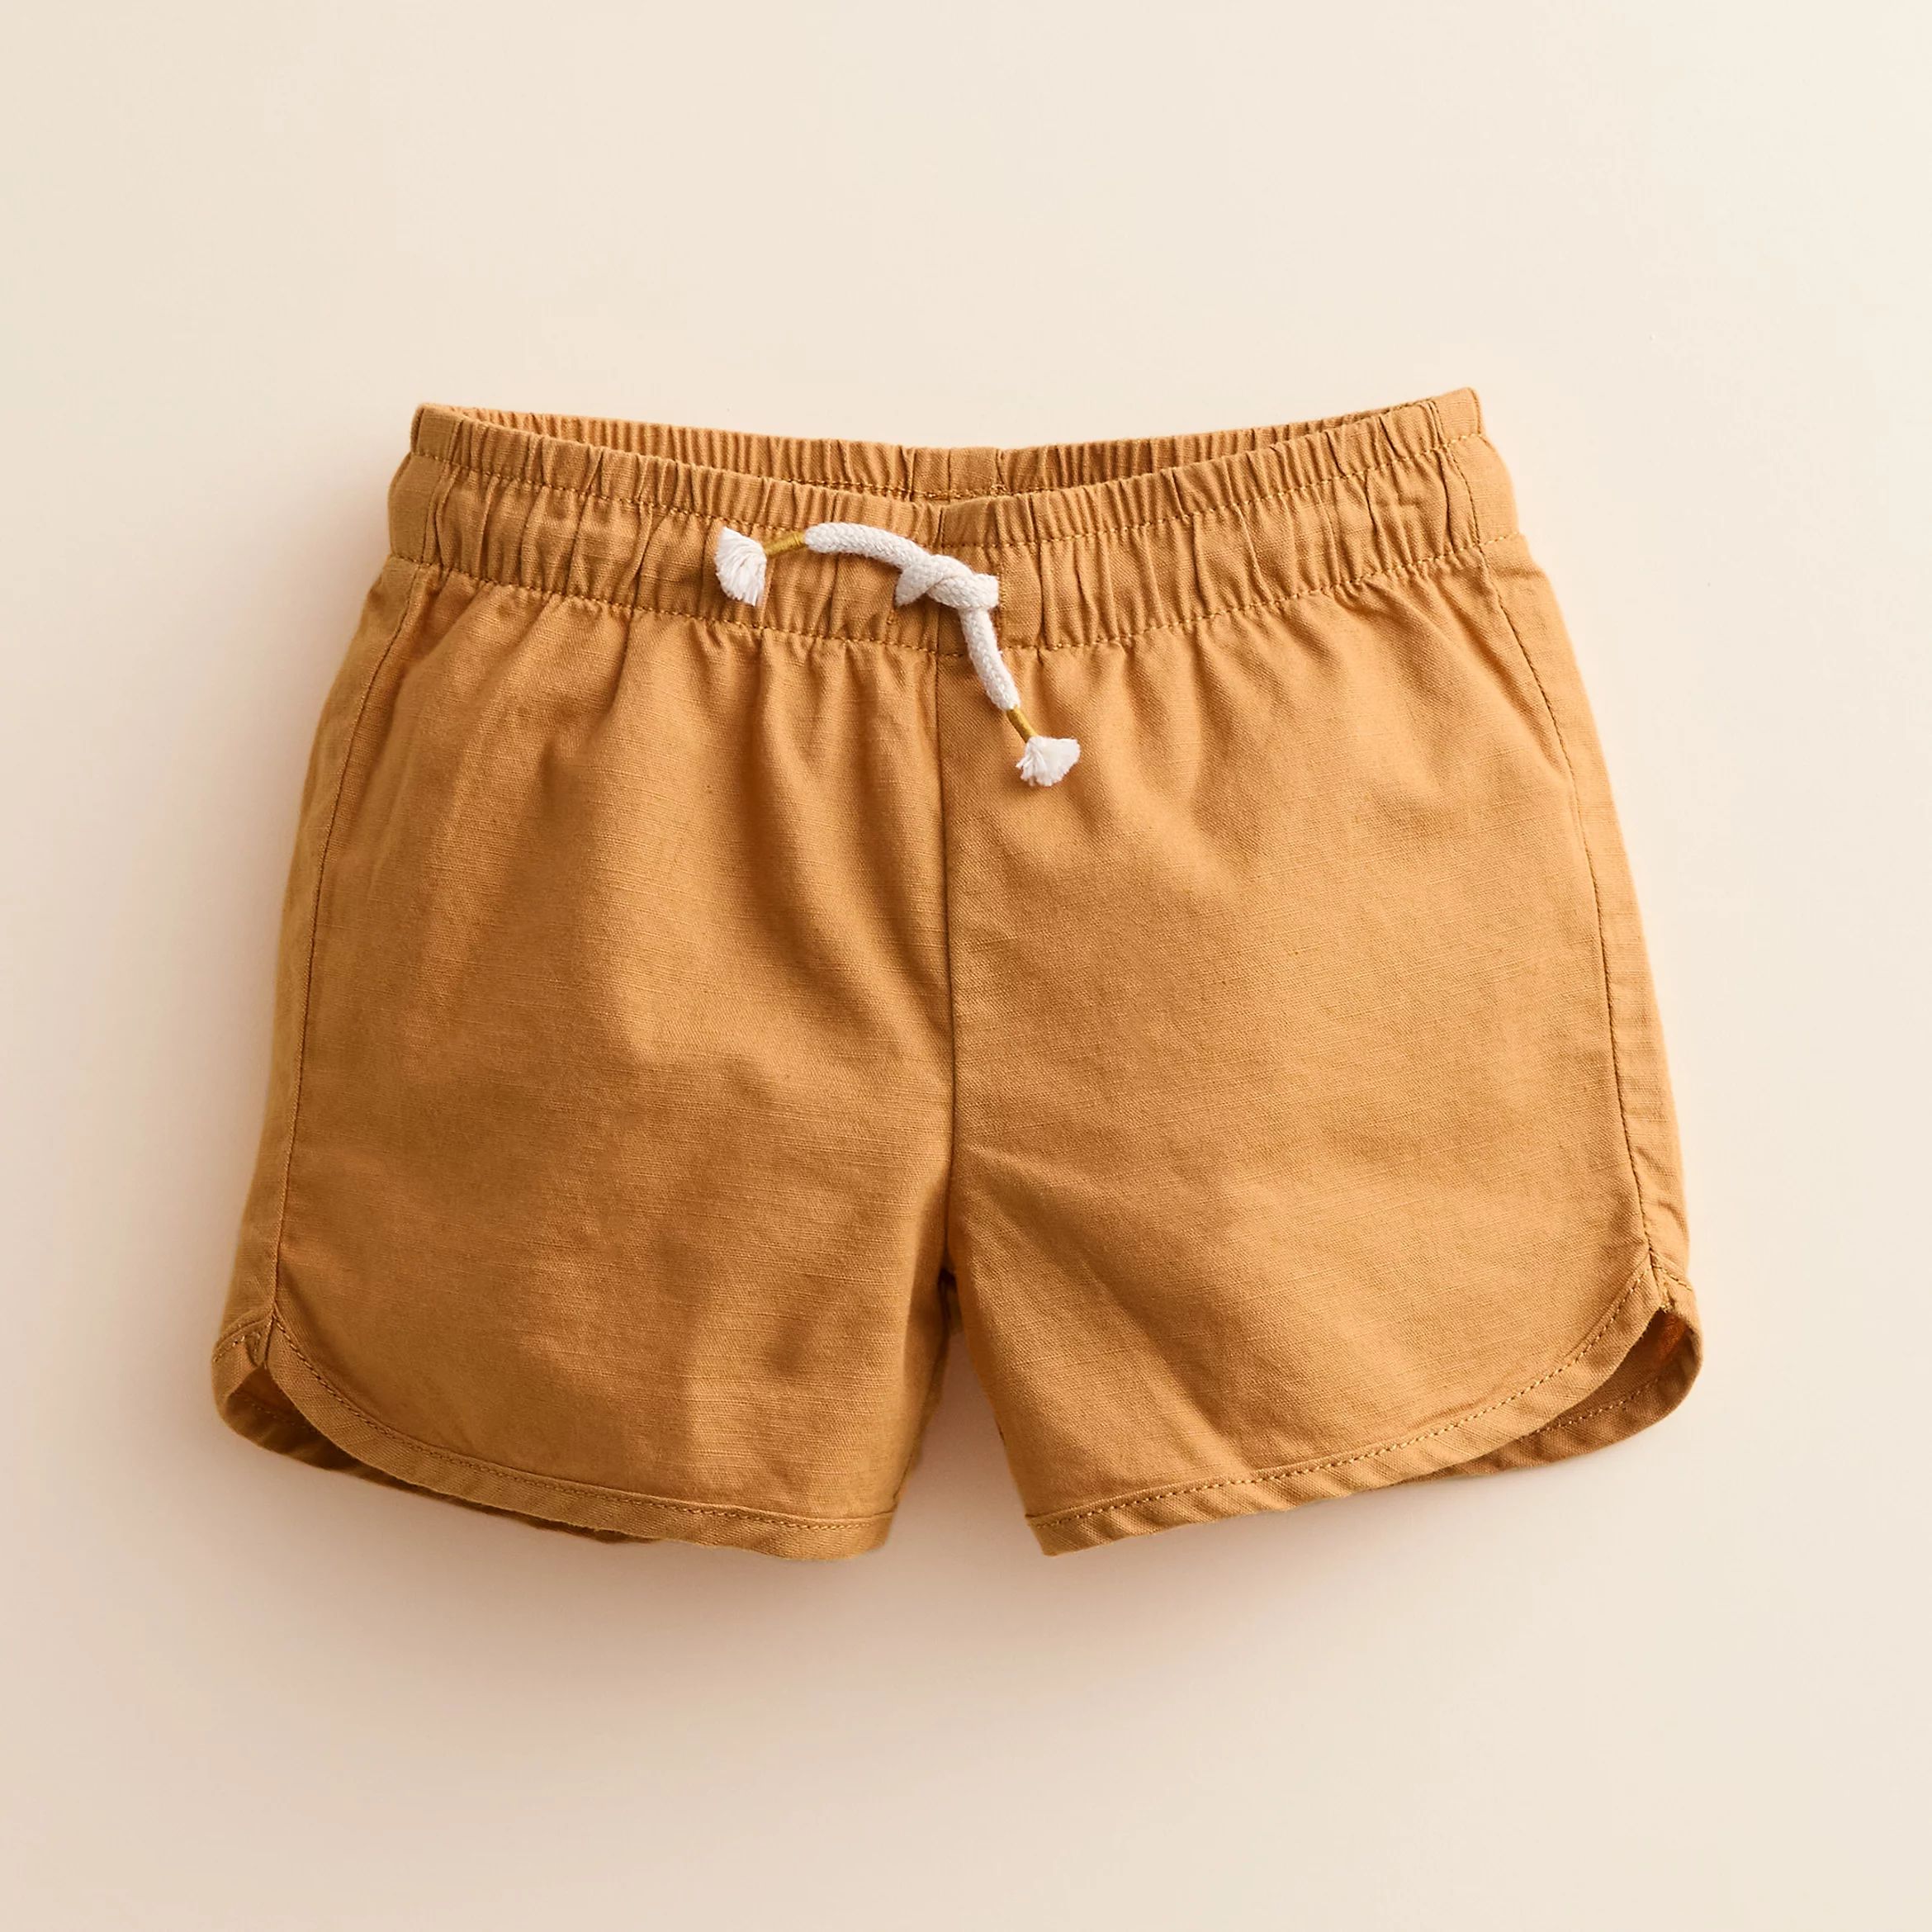 Baby & Toddler Little Co. by Lauren Conrad Dolphin Shorts | Kohl's